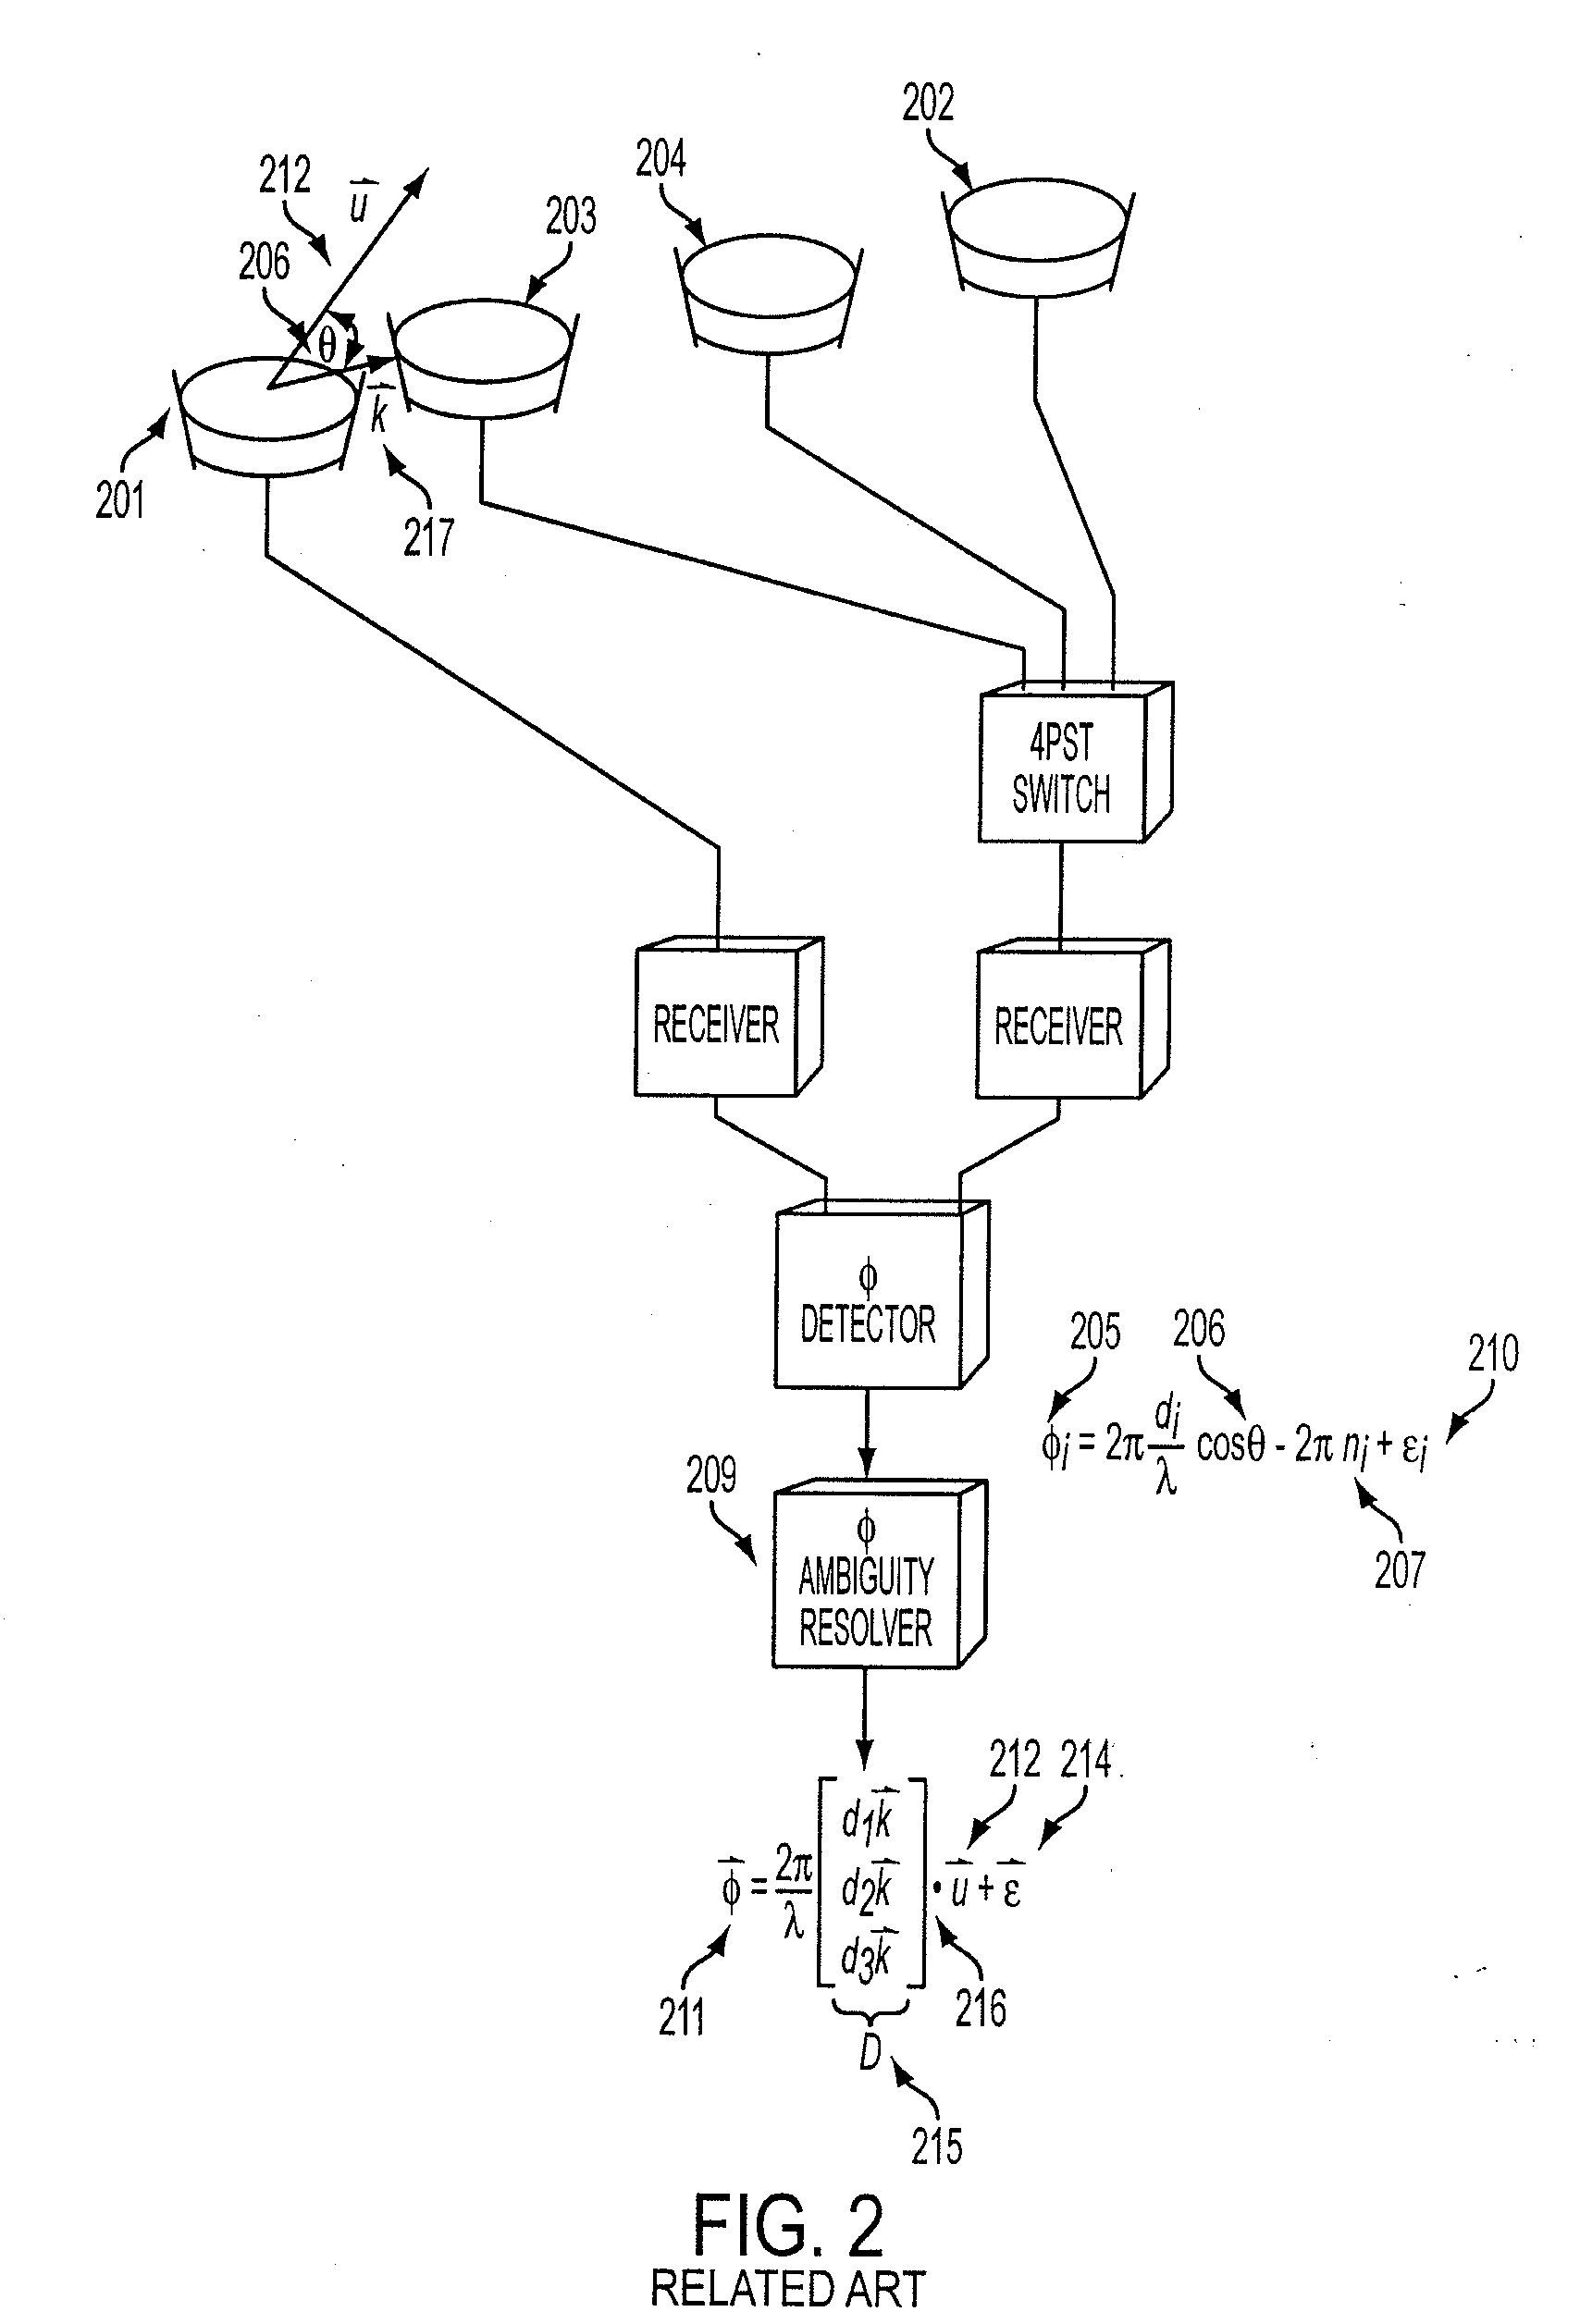 Method for single satellite geolocation of emitters using an ambiguous interferometer array